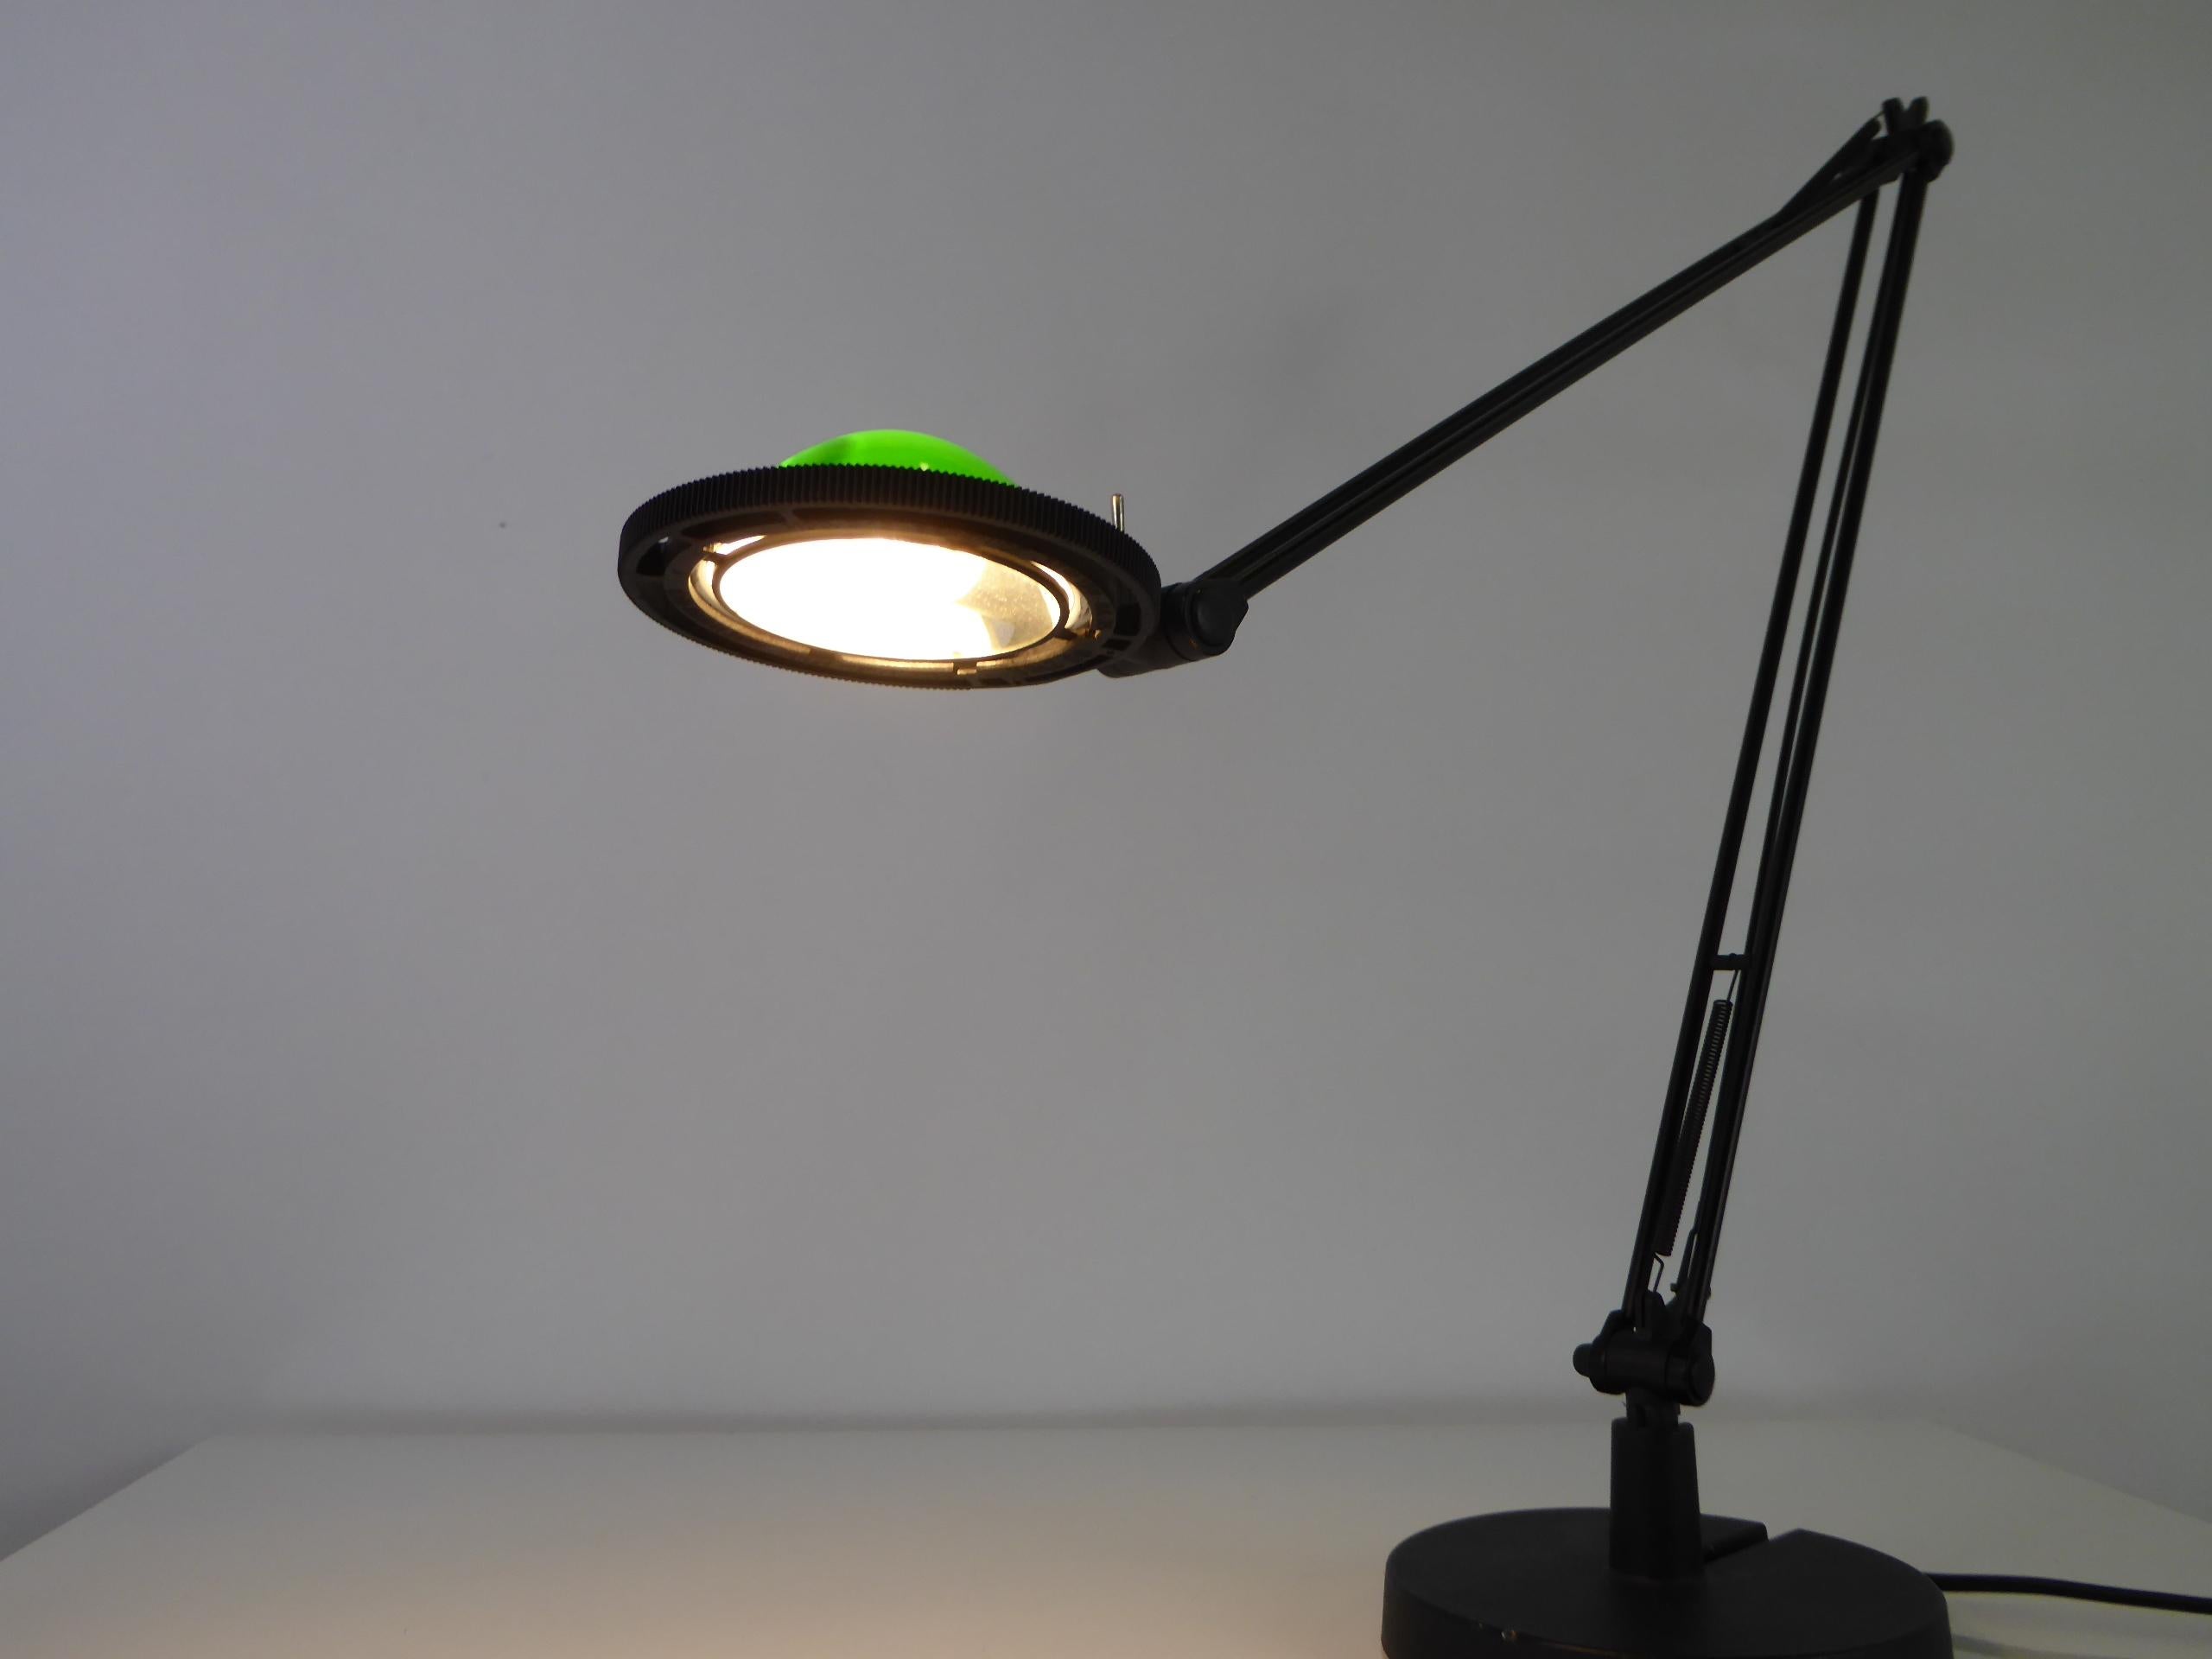 20th Century Berenice Task Lamp by Rizzatto & Meda for Luceplan